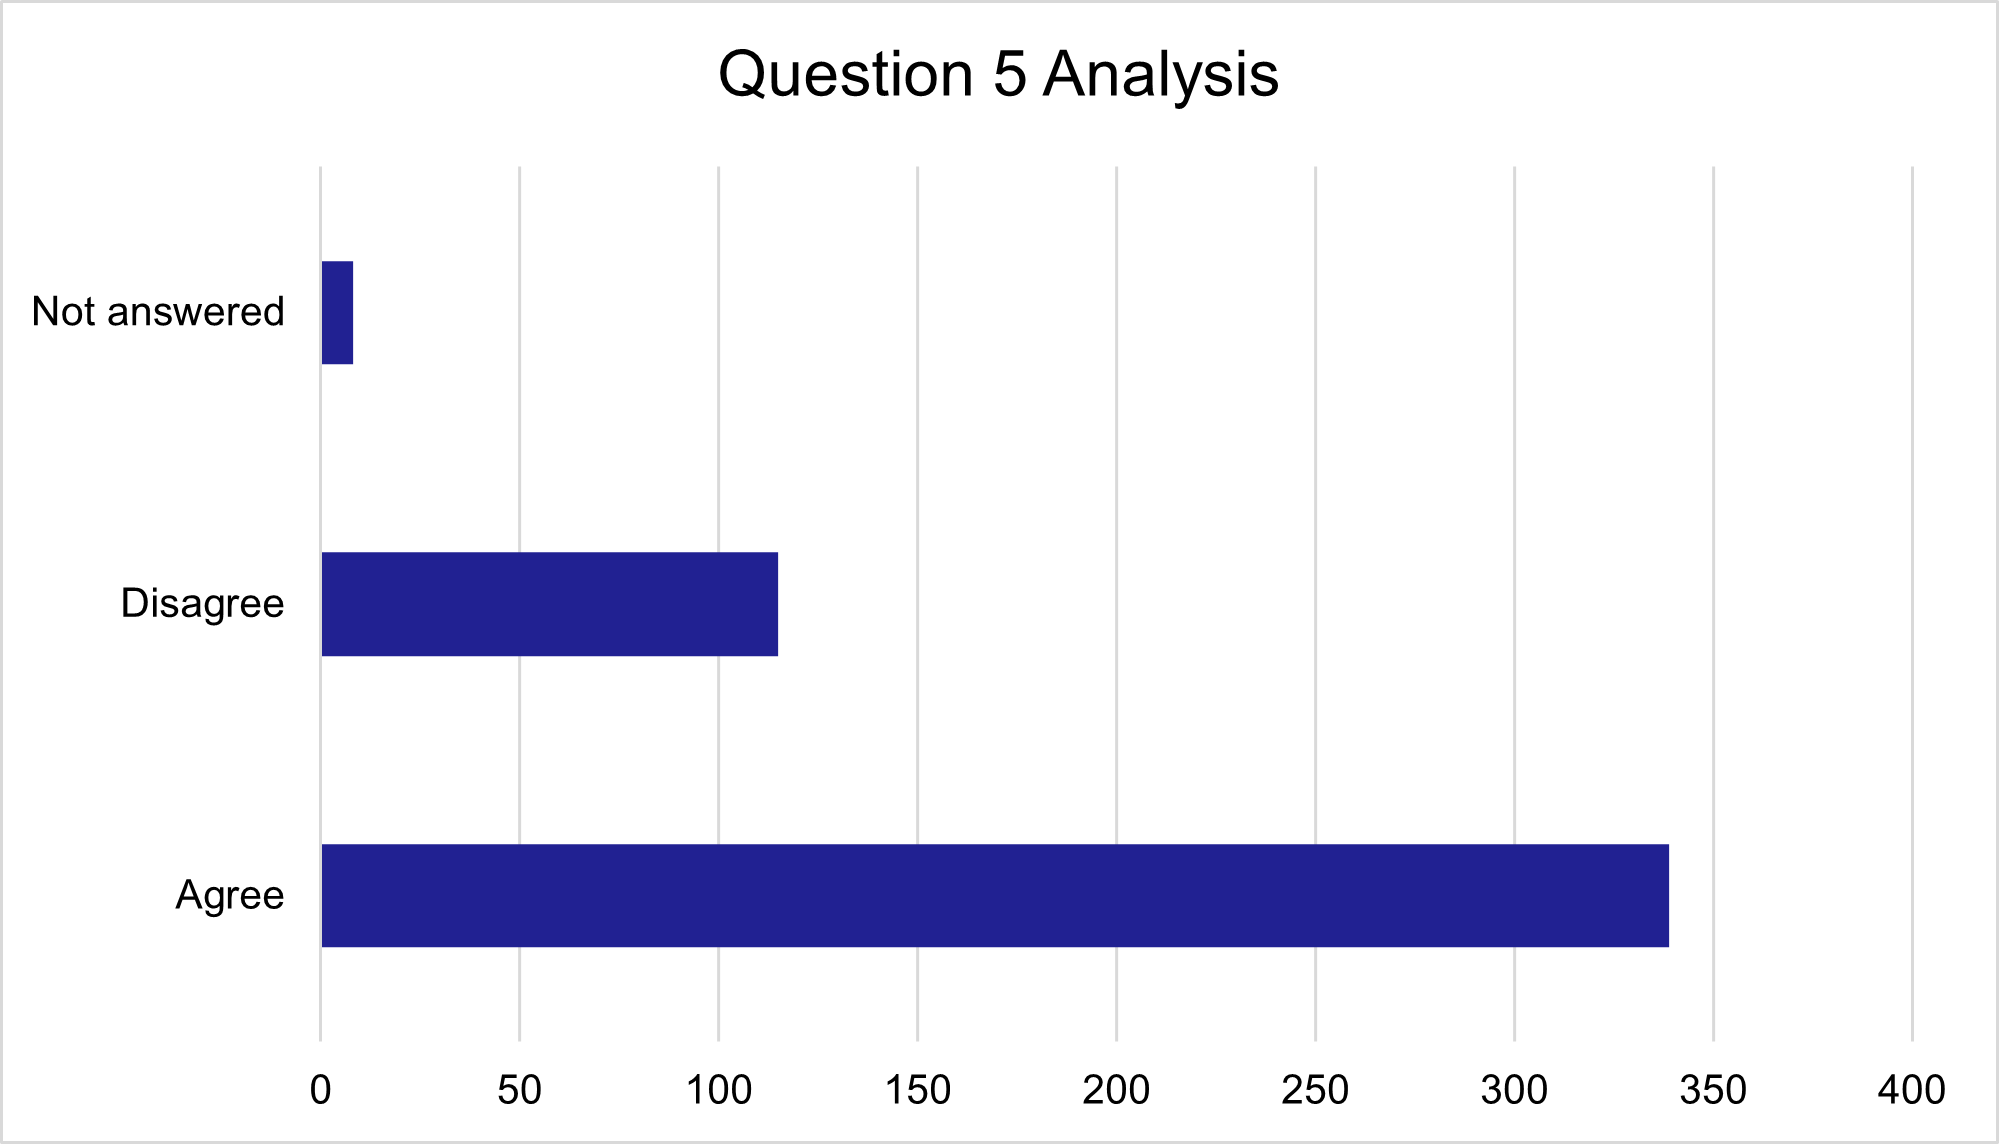 Question 5 responses, as described in text